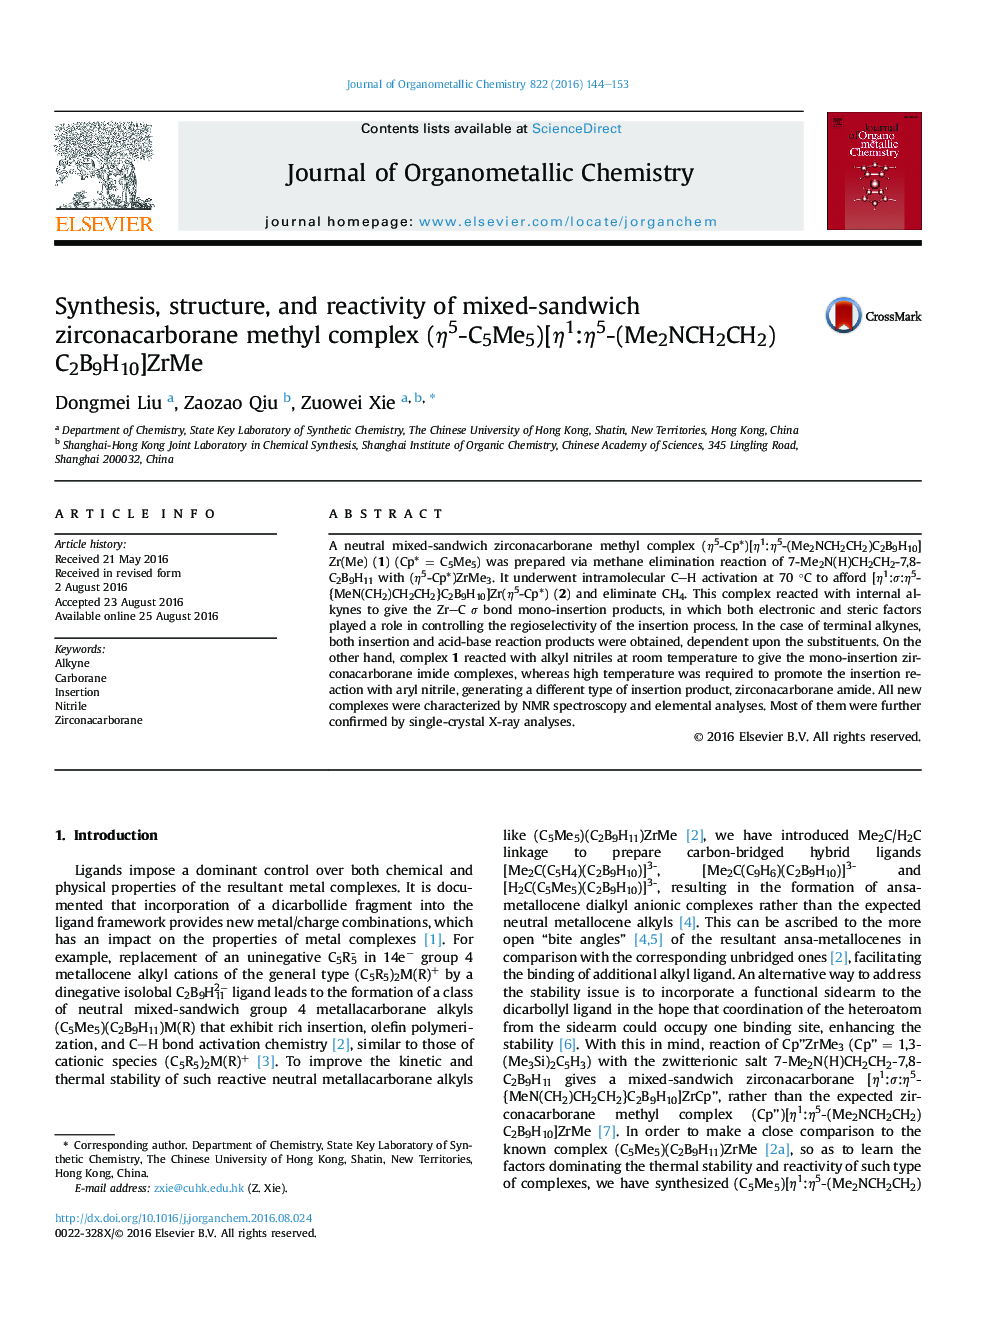 Synthesis, structure, and reactivity of mixed-sandwich zirconacarborane methyl complex (η5-C5Me5)[η1:η5-(Me2NCH2CH2)C2B9H10]ZrMe